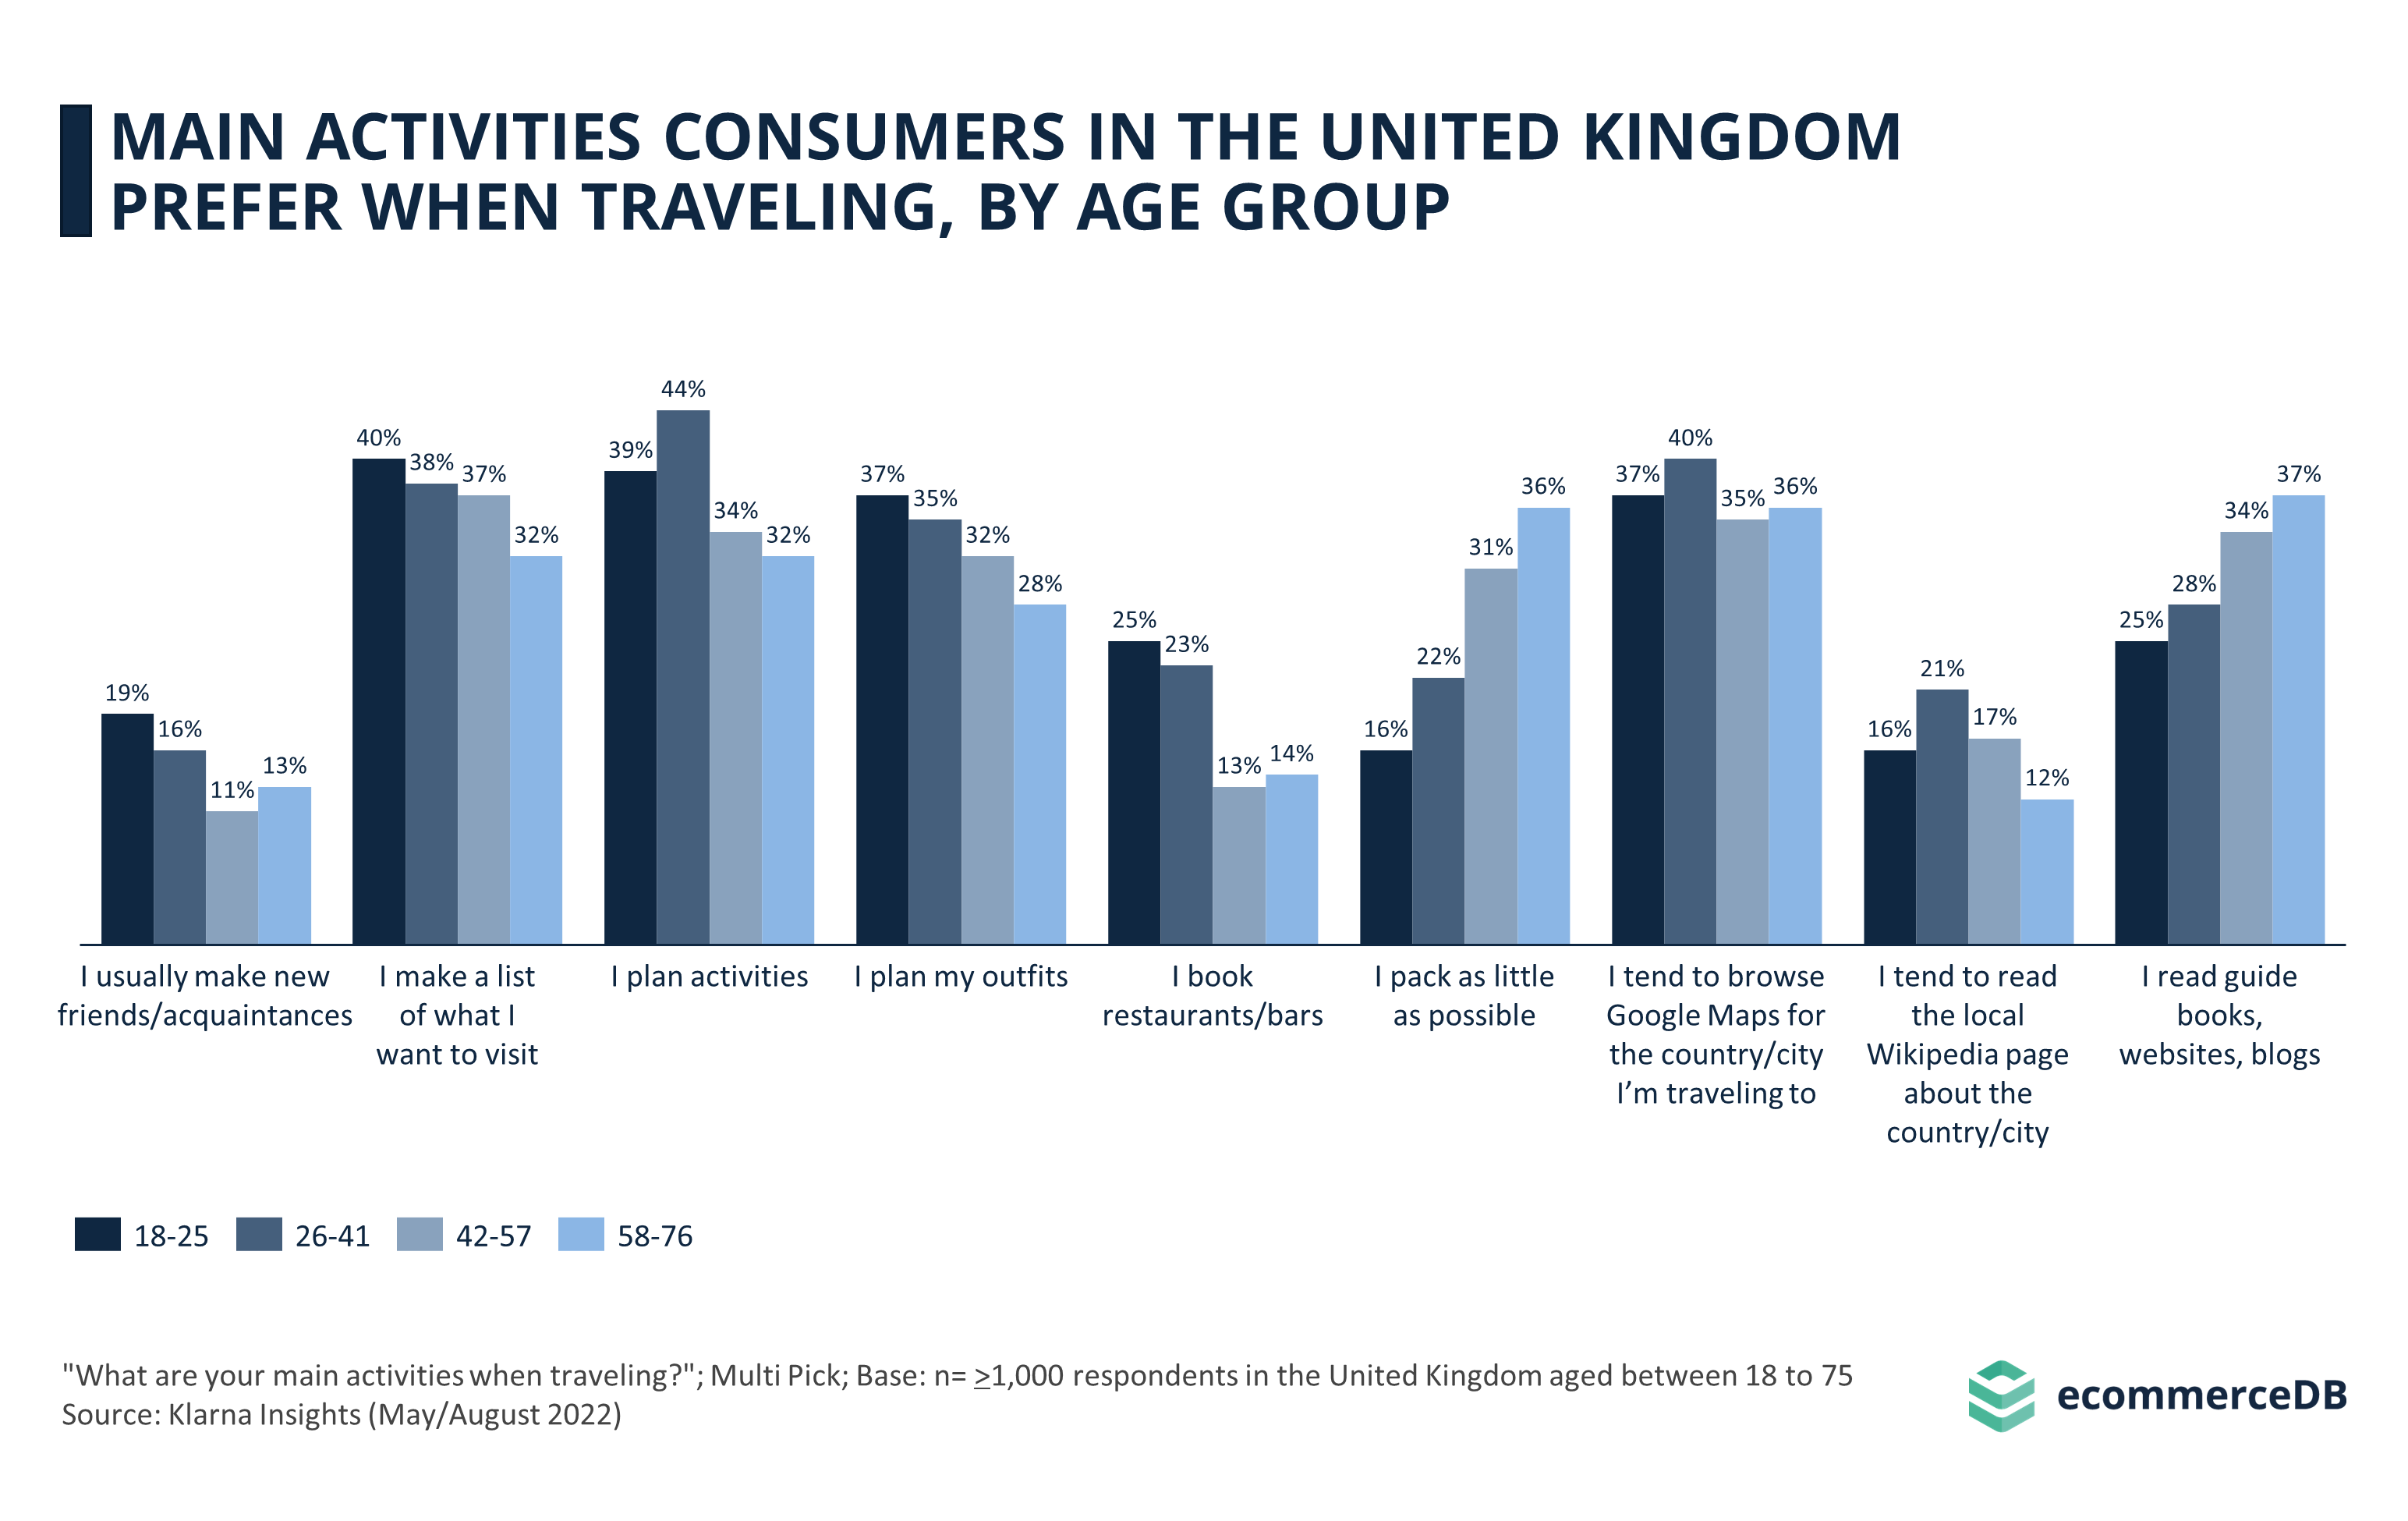 Main Activities Consumers in the United Kingdom Prefer When Traveling, by Age Group